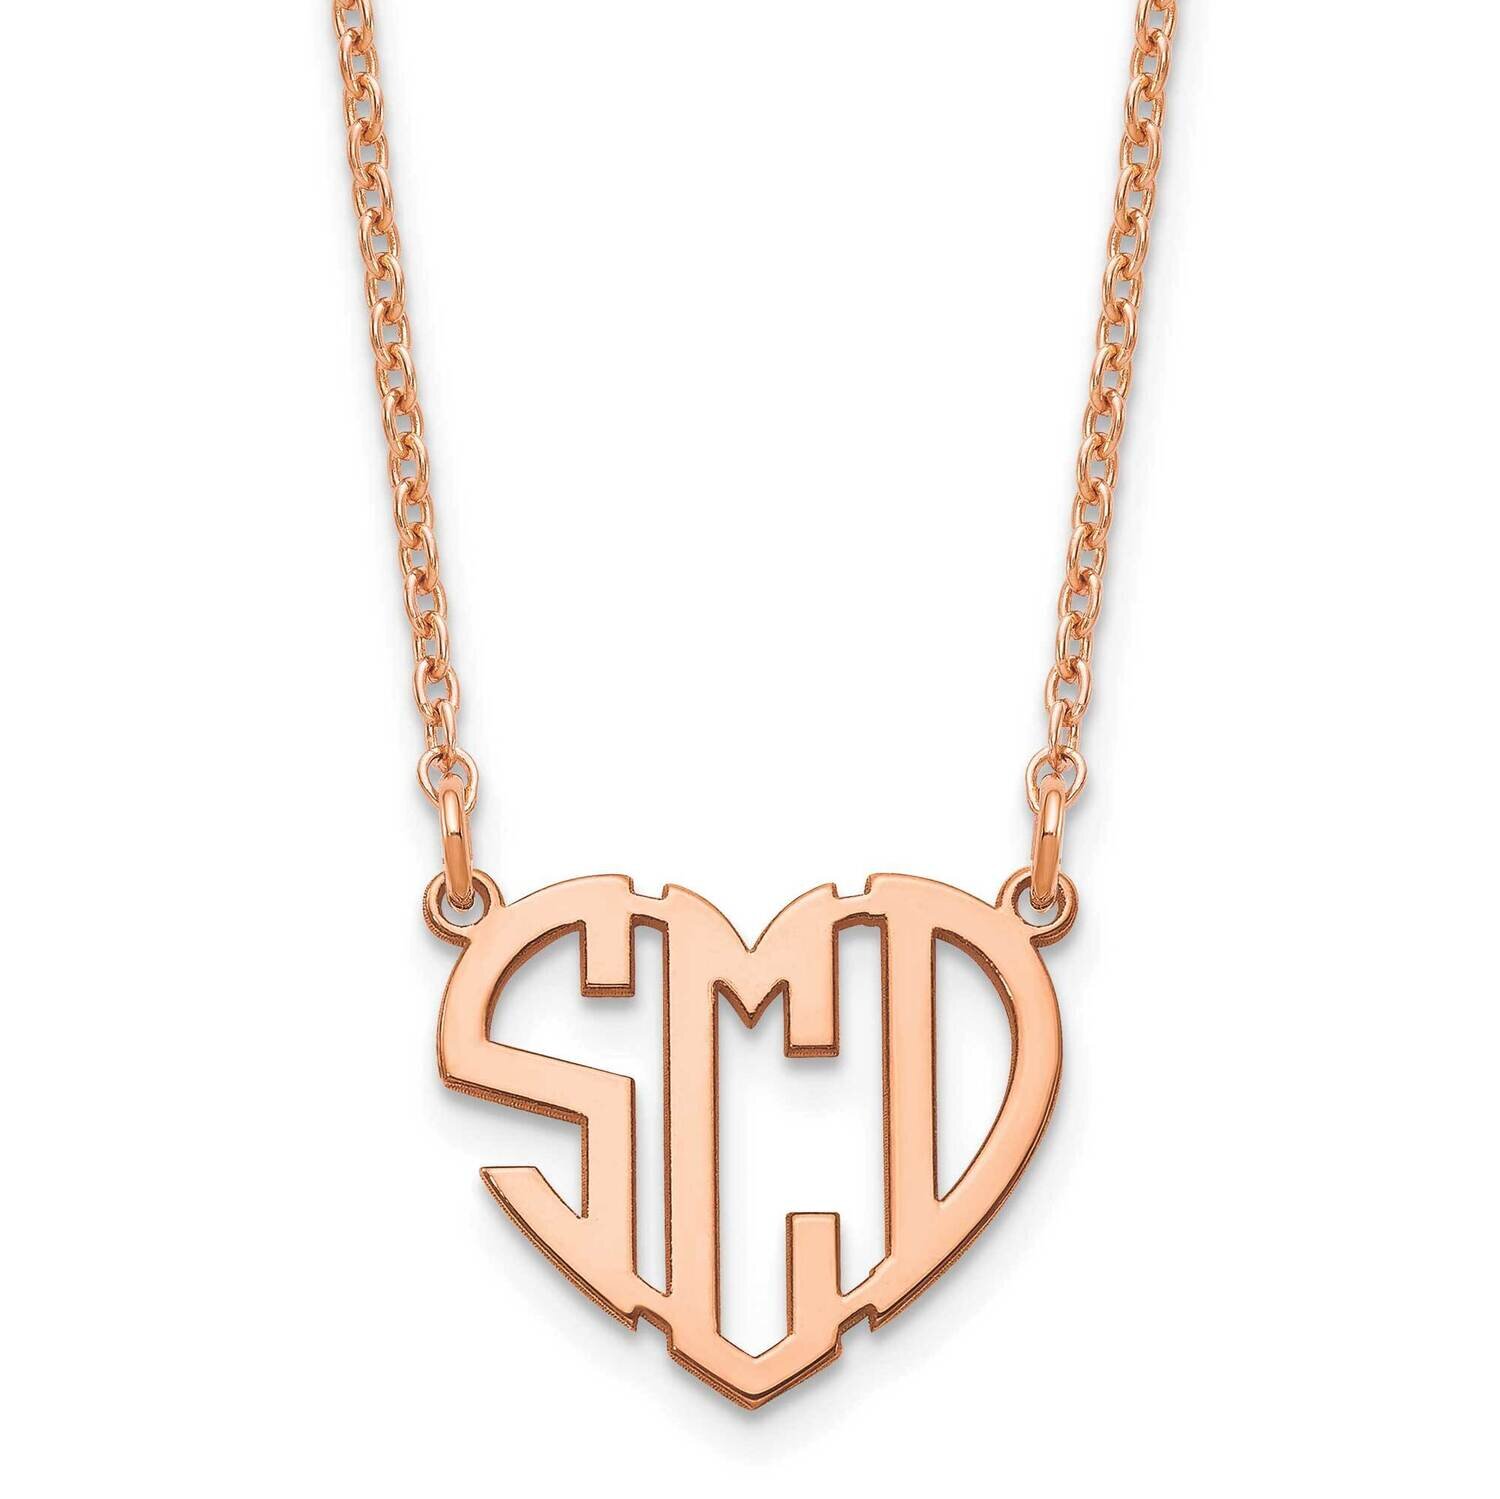 Polished Cut Out Heart Monogram Necklace Sterling Silver Rose-plated XNA895RP